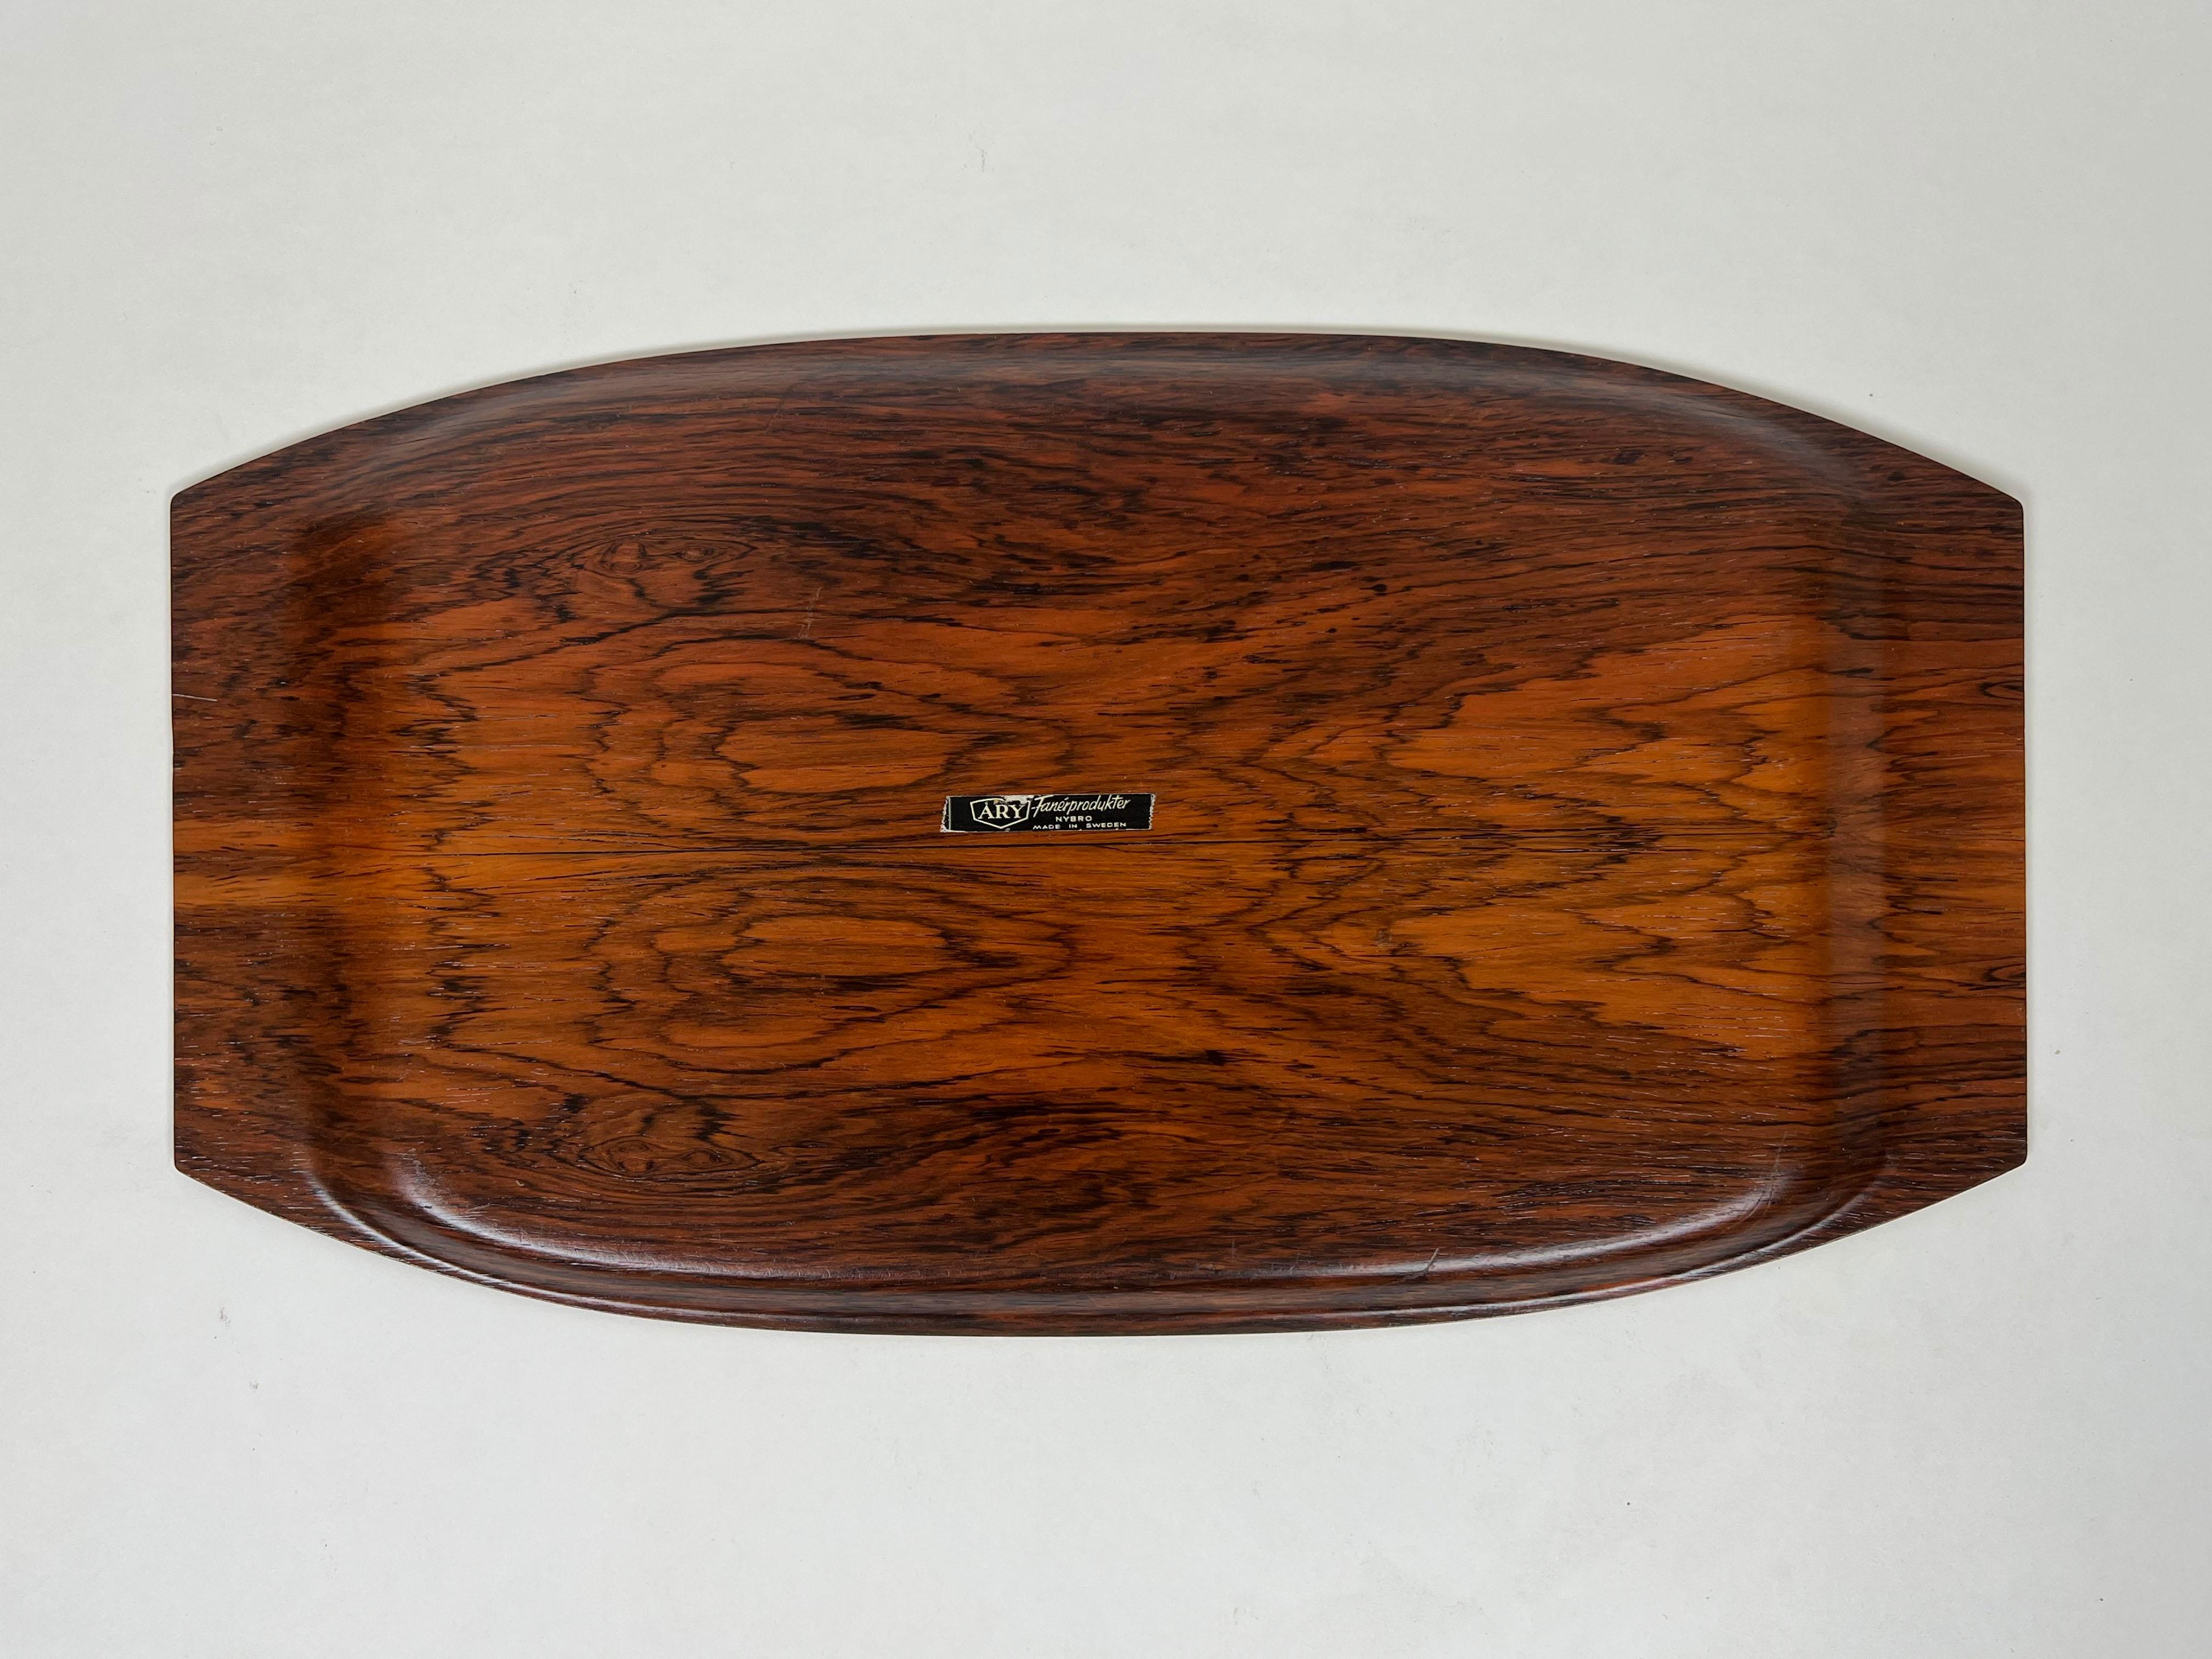 20th Century Scandinavian Rosewood Tray by Åry Fanérprodukter Nybro For Sale